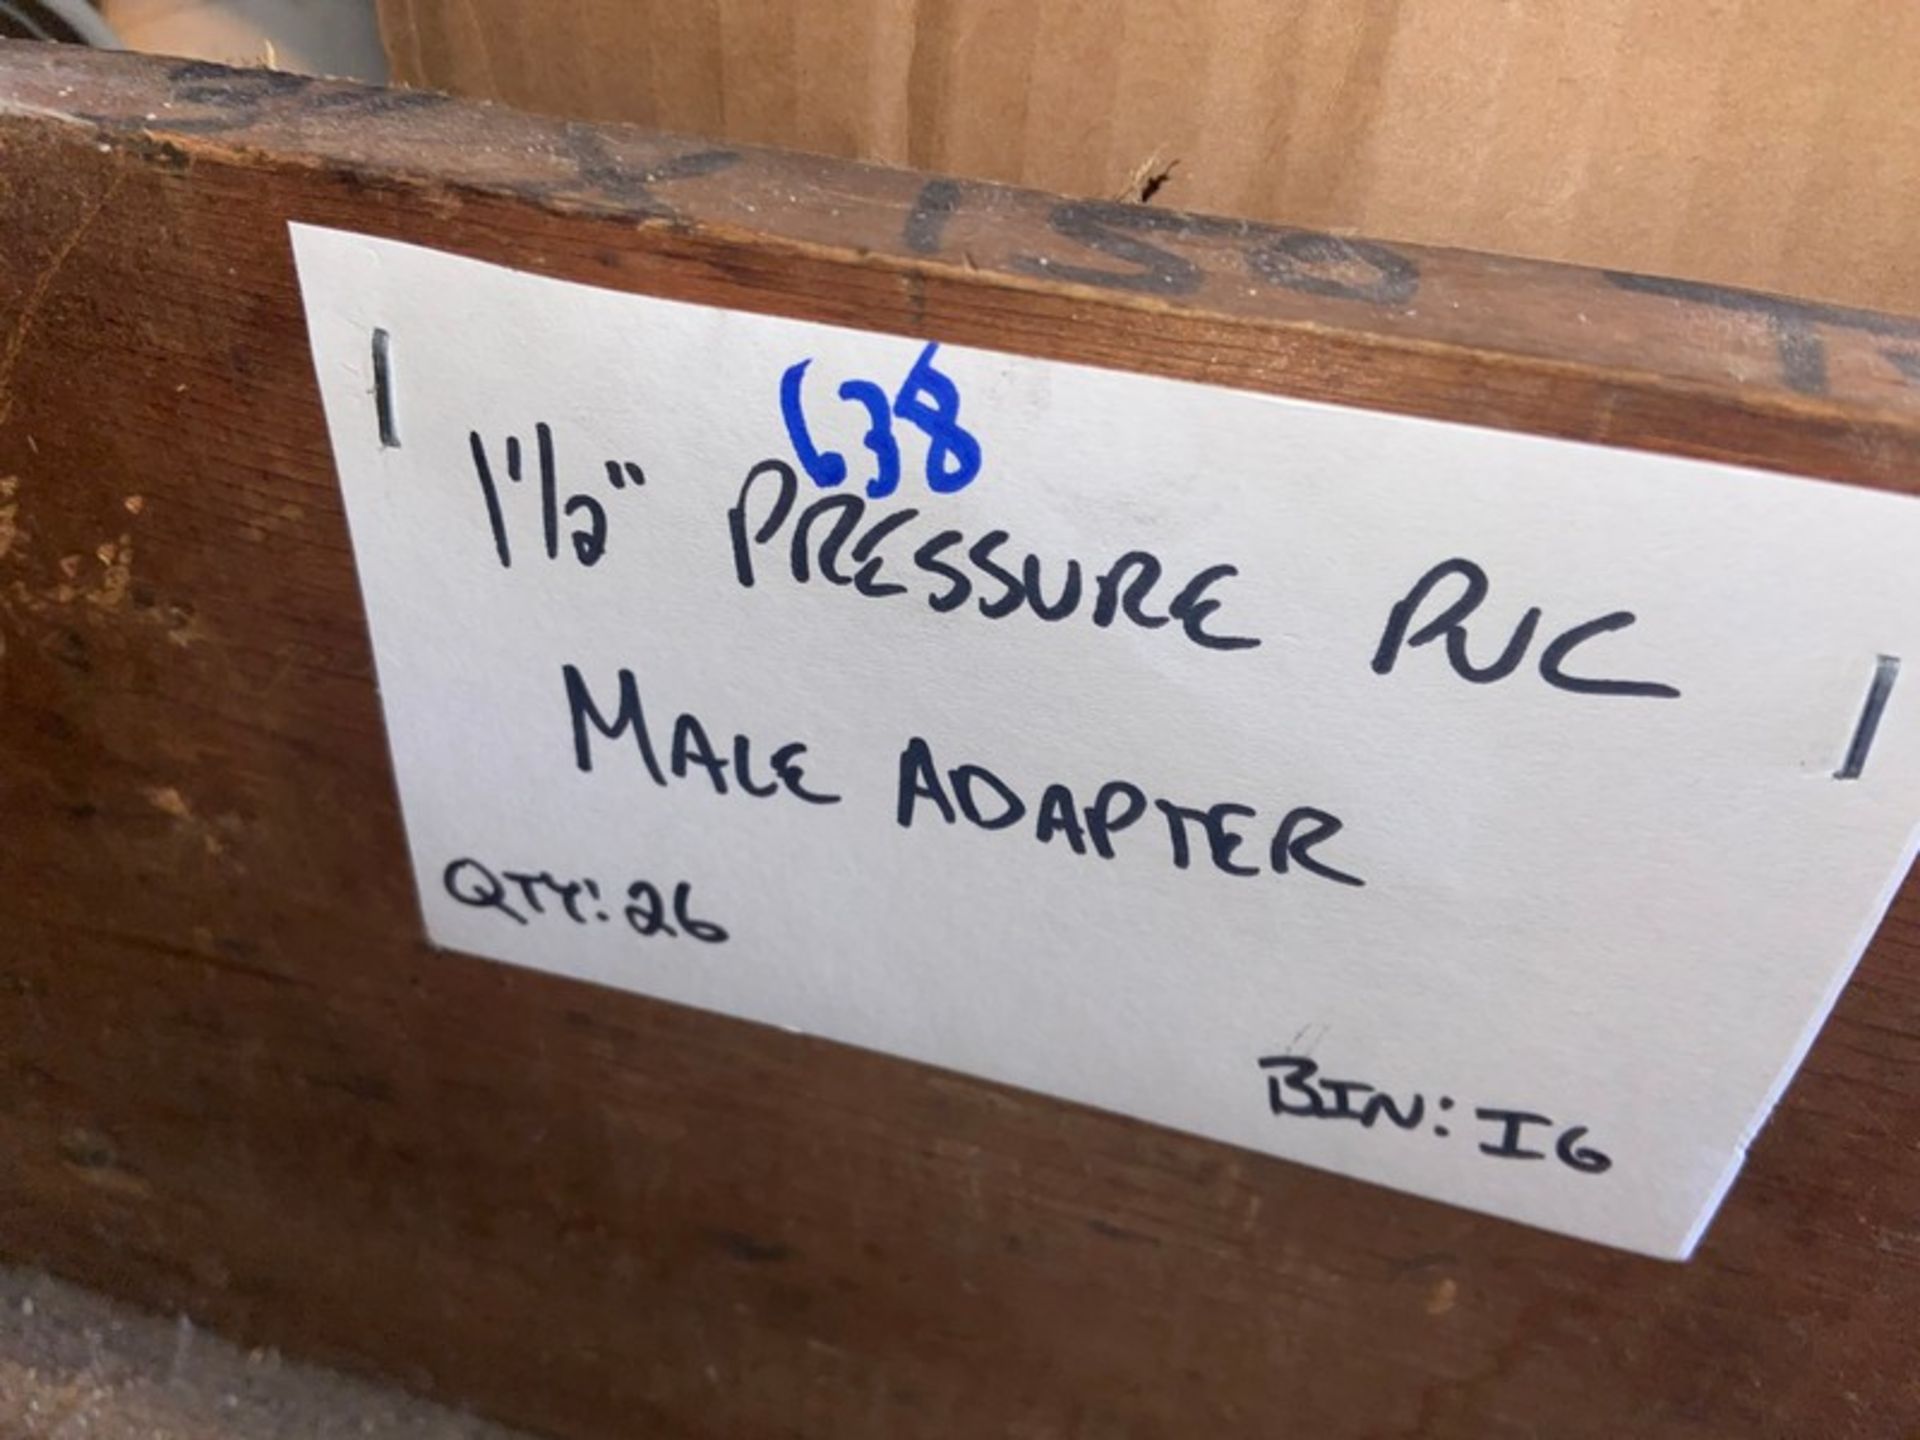 (26) 1 1/2” Pressure PVC Male Adapter (Bin:I6) (LOCATED IN MONROEVILLE, PA) - Image 8 of 8